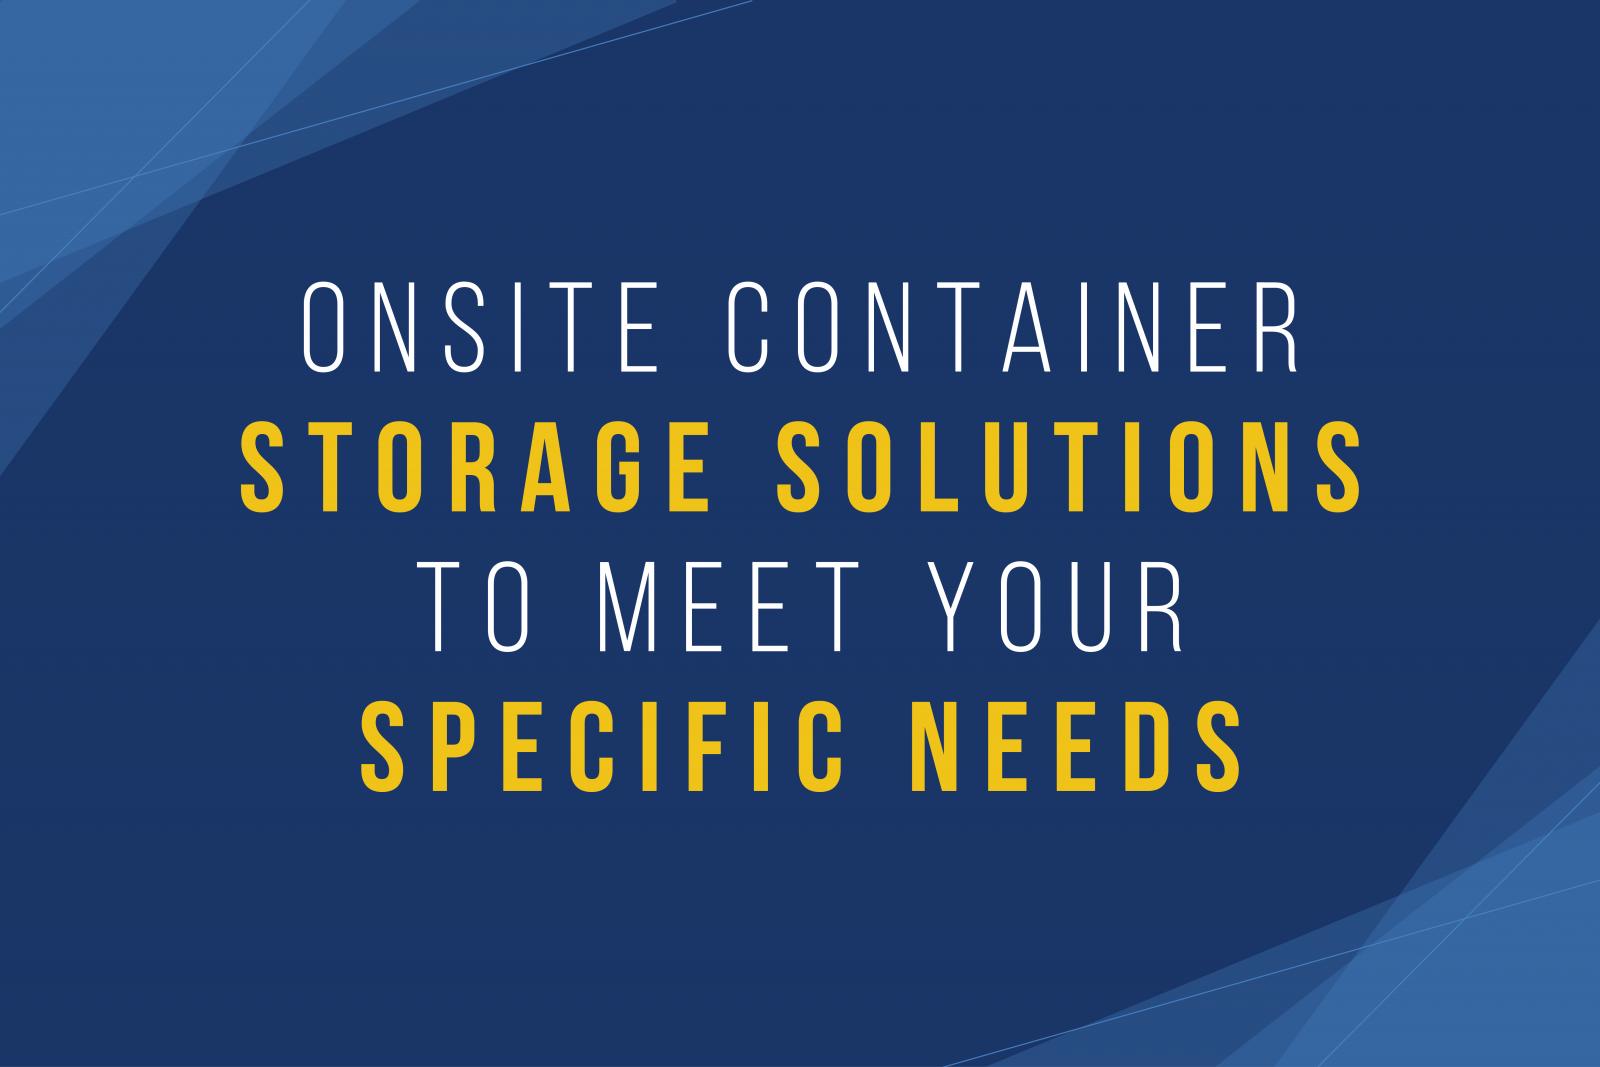 Onsite container storage solutions to meet your specific needs